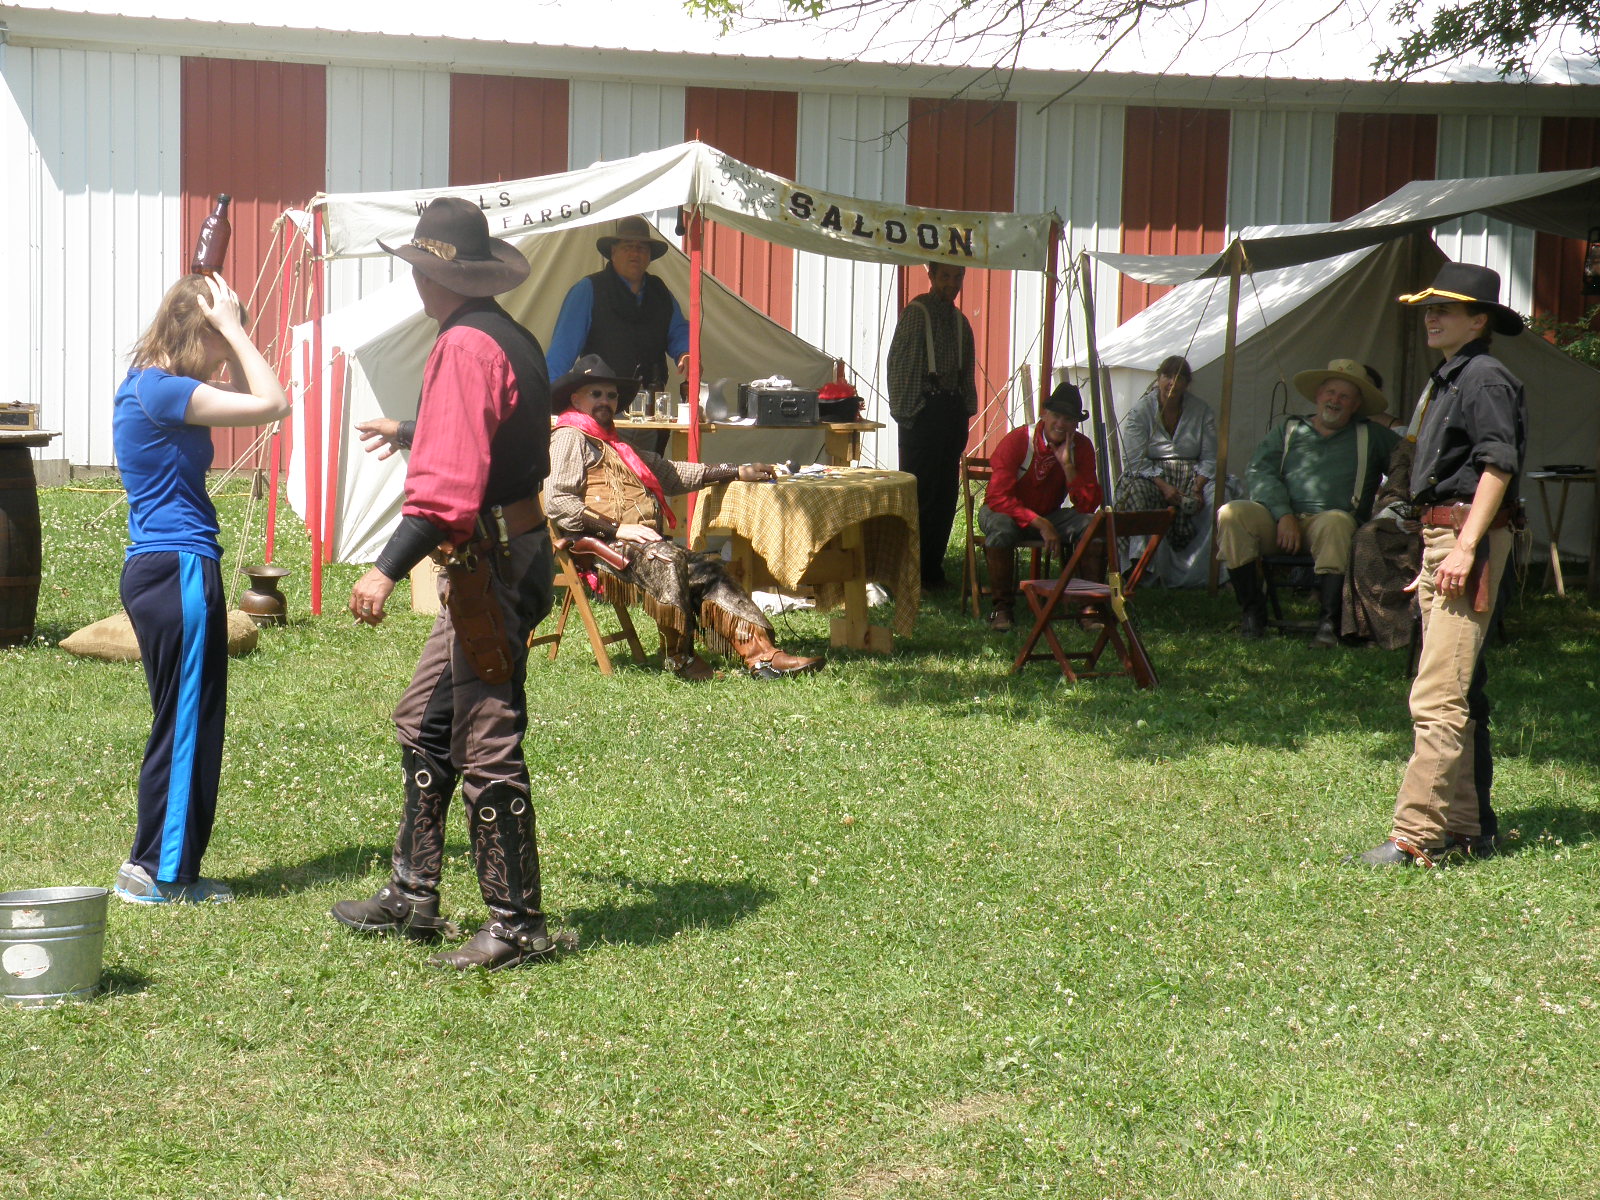 Shadows Of The Old West at this year’s Tioga County Fair